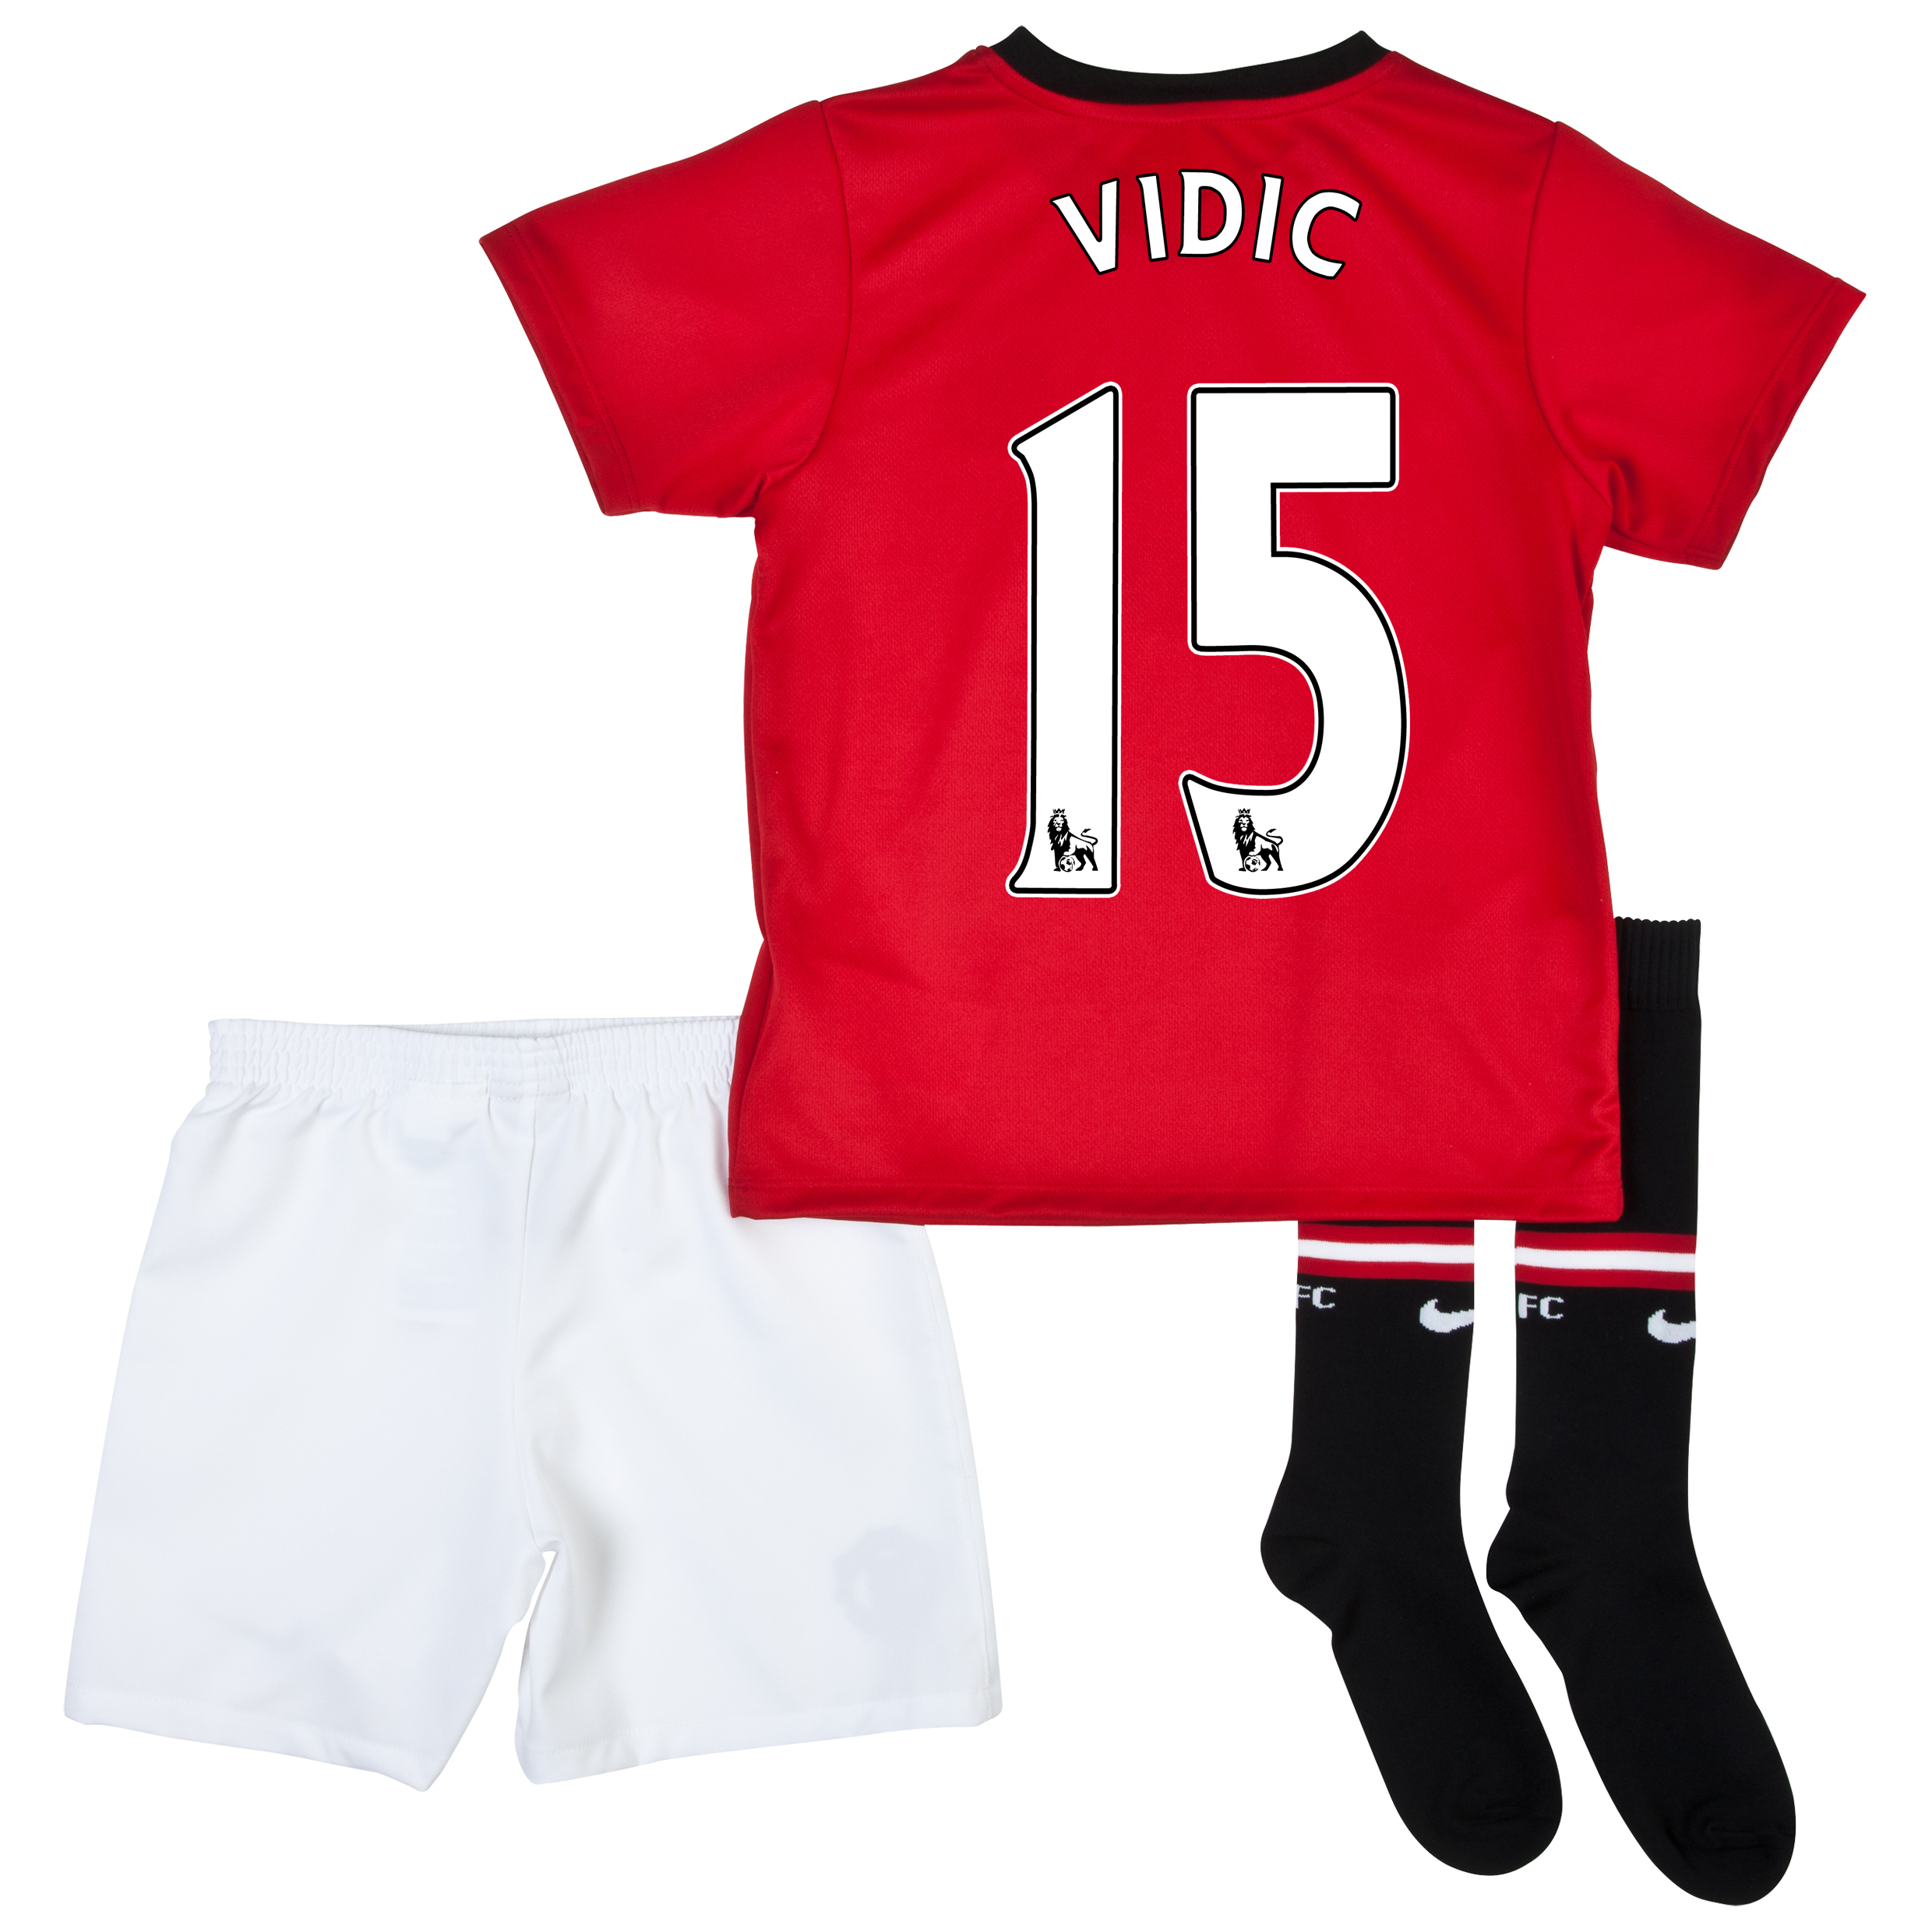 Manchester United Home Kit 2013/14 - Little Boys with Vidic 15 printing